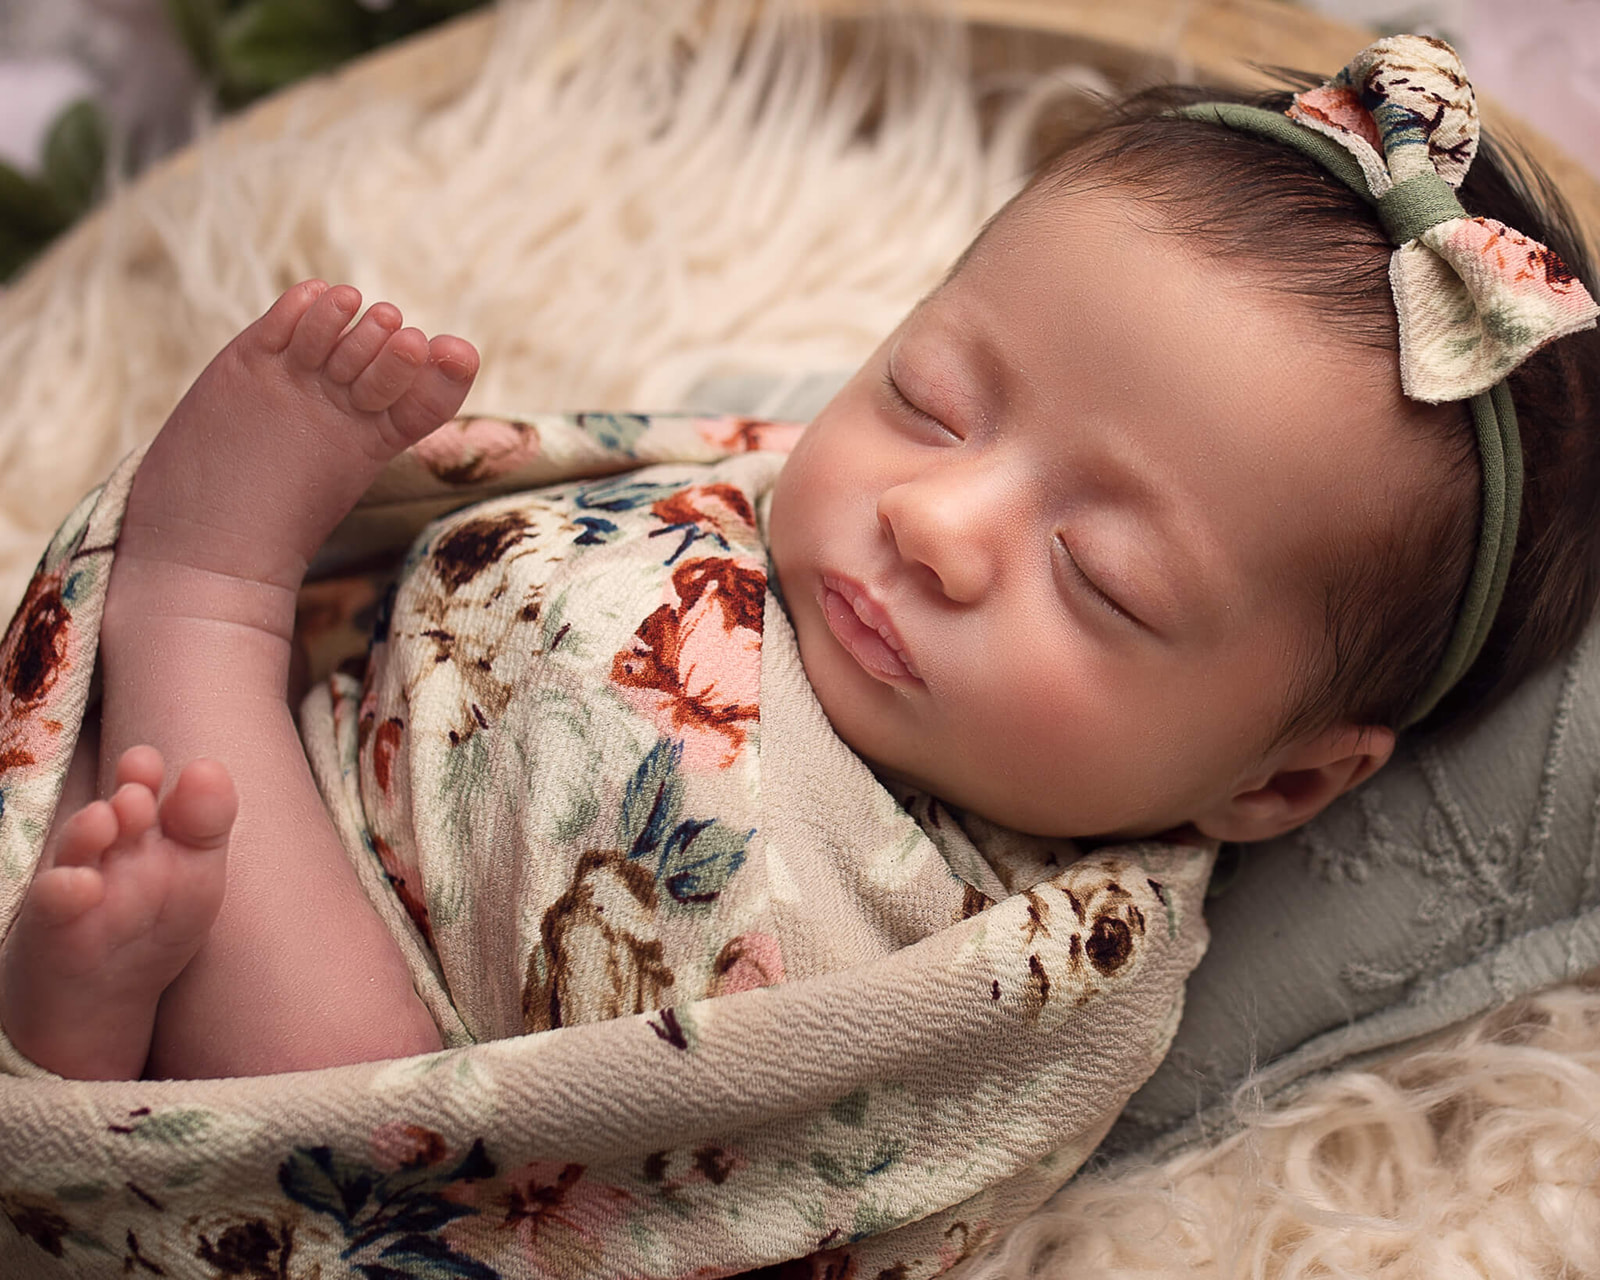 Let's talk about newborn care tips! Sleeping newborn during newborn photography session with floral wrap
